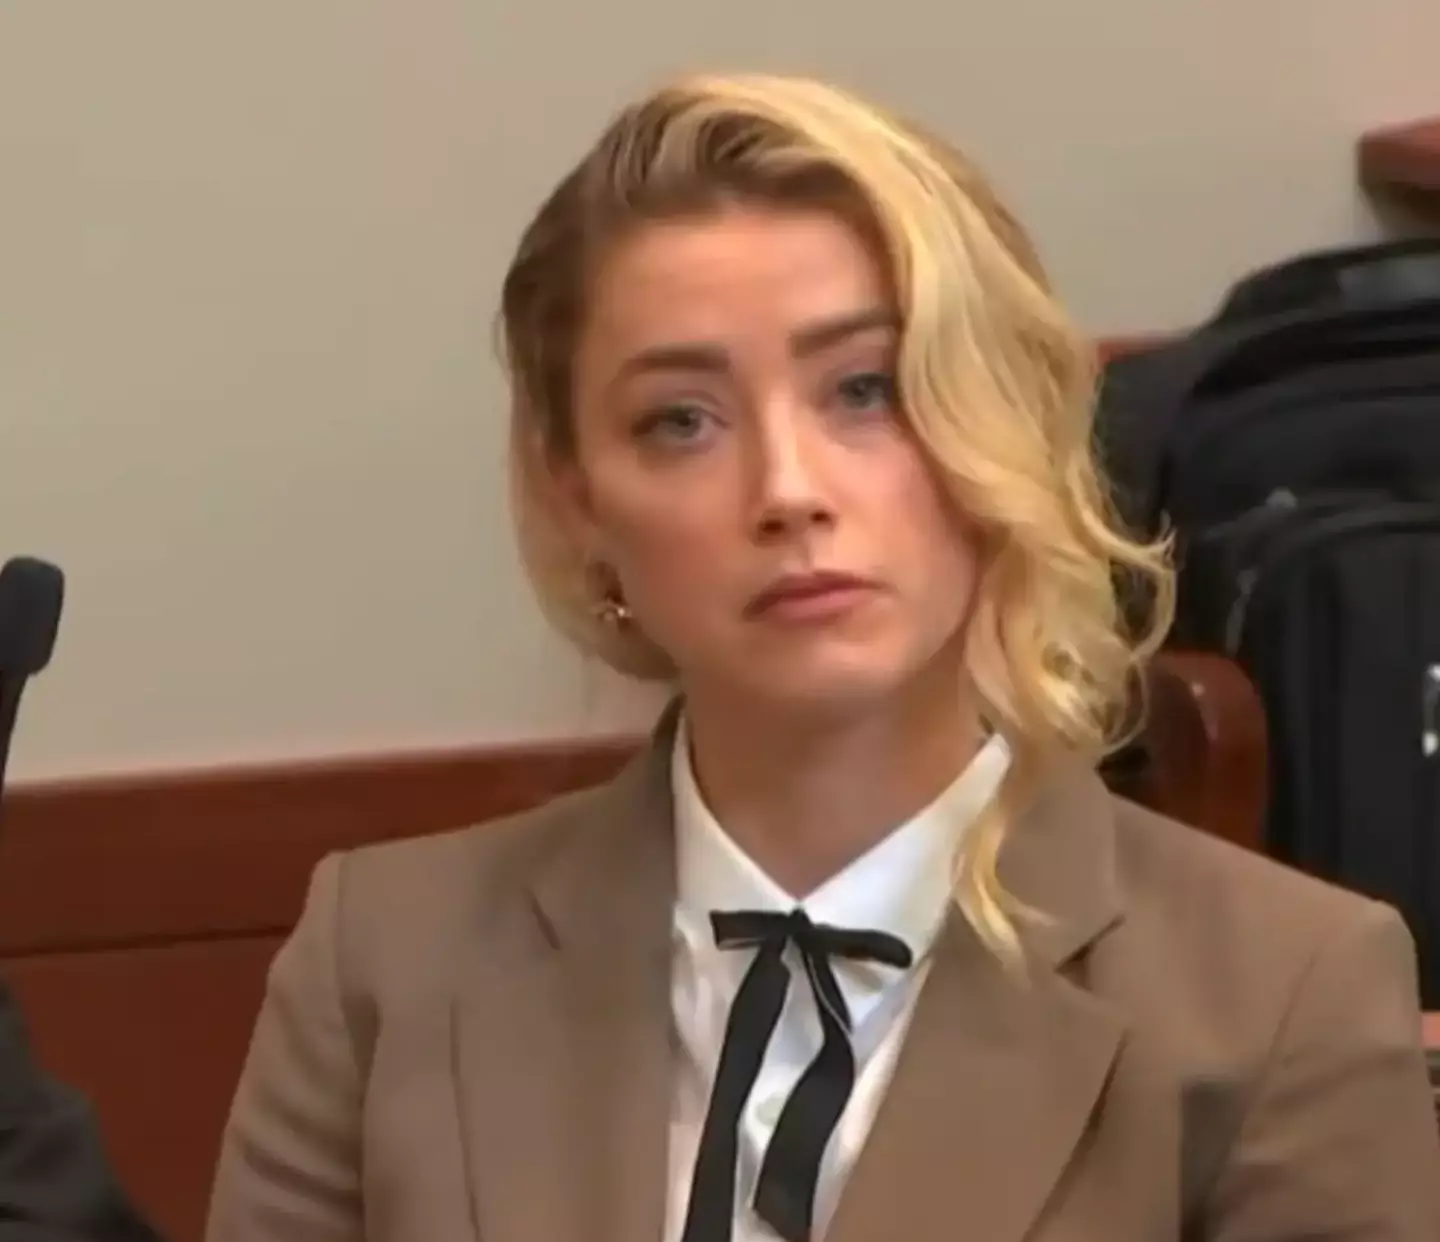 A psychologist has challenged claims Amber Heard has PTSD.